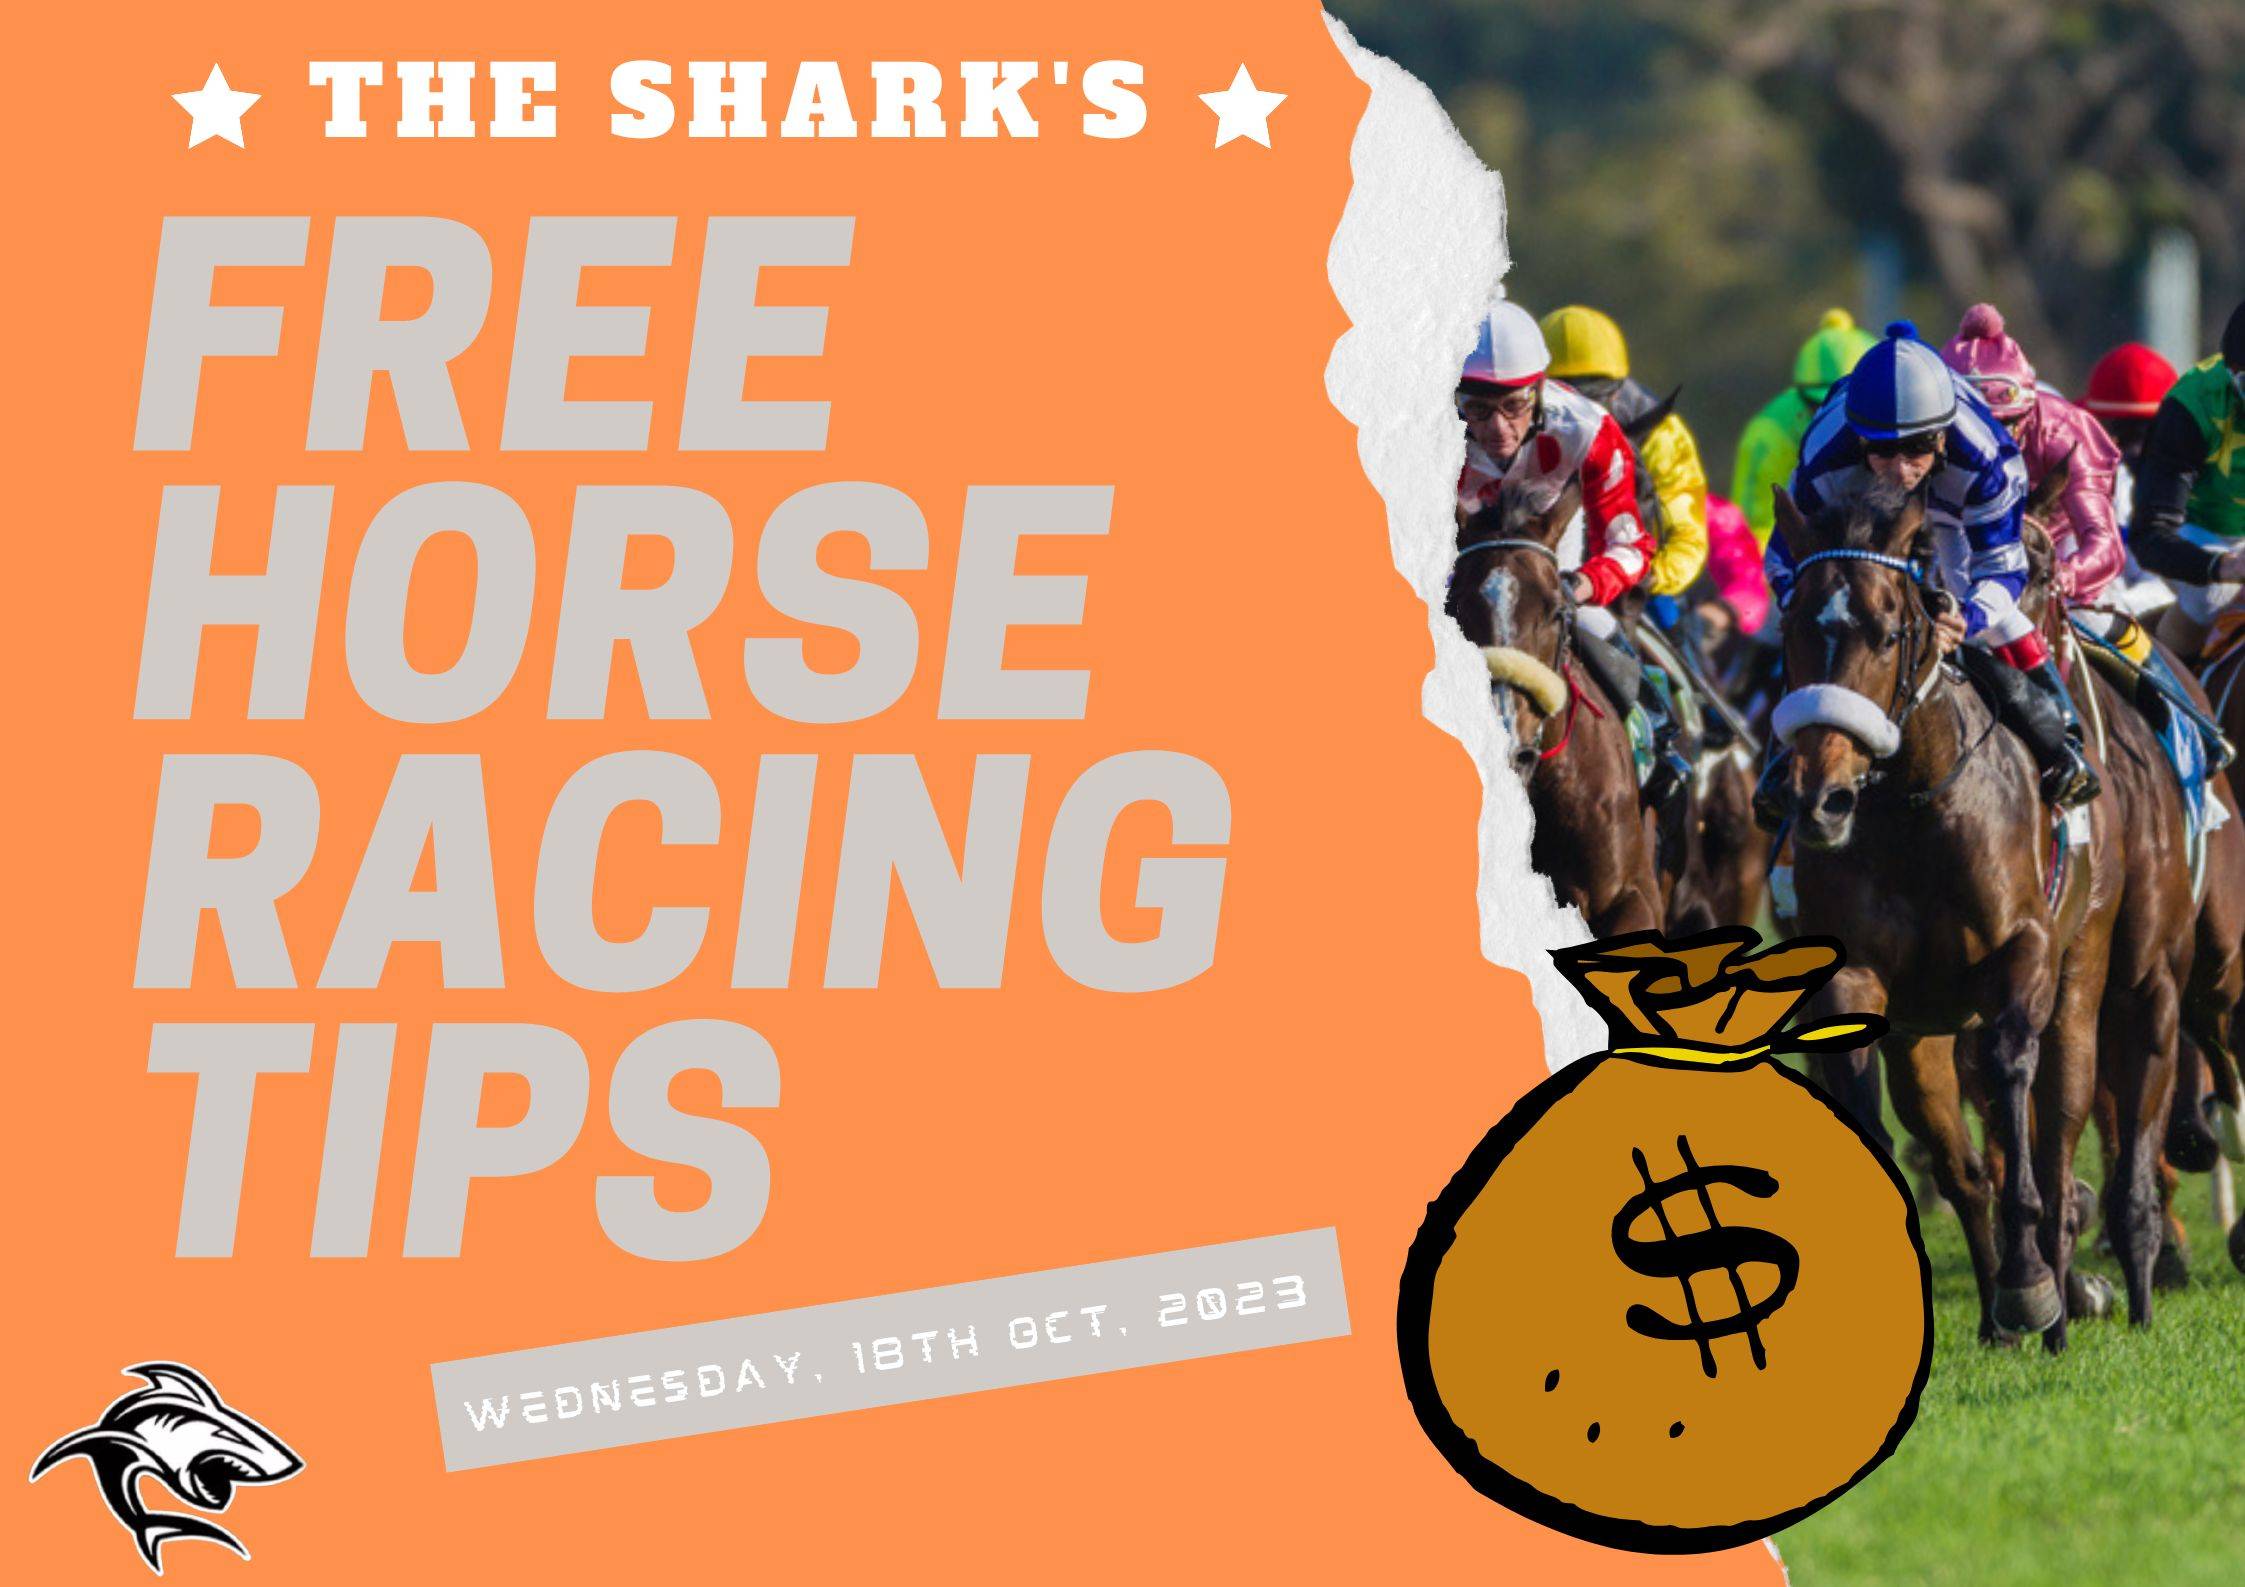 Free Horse Racing Tips - 18th Oct